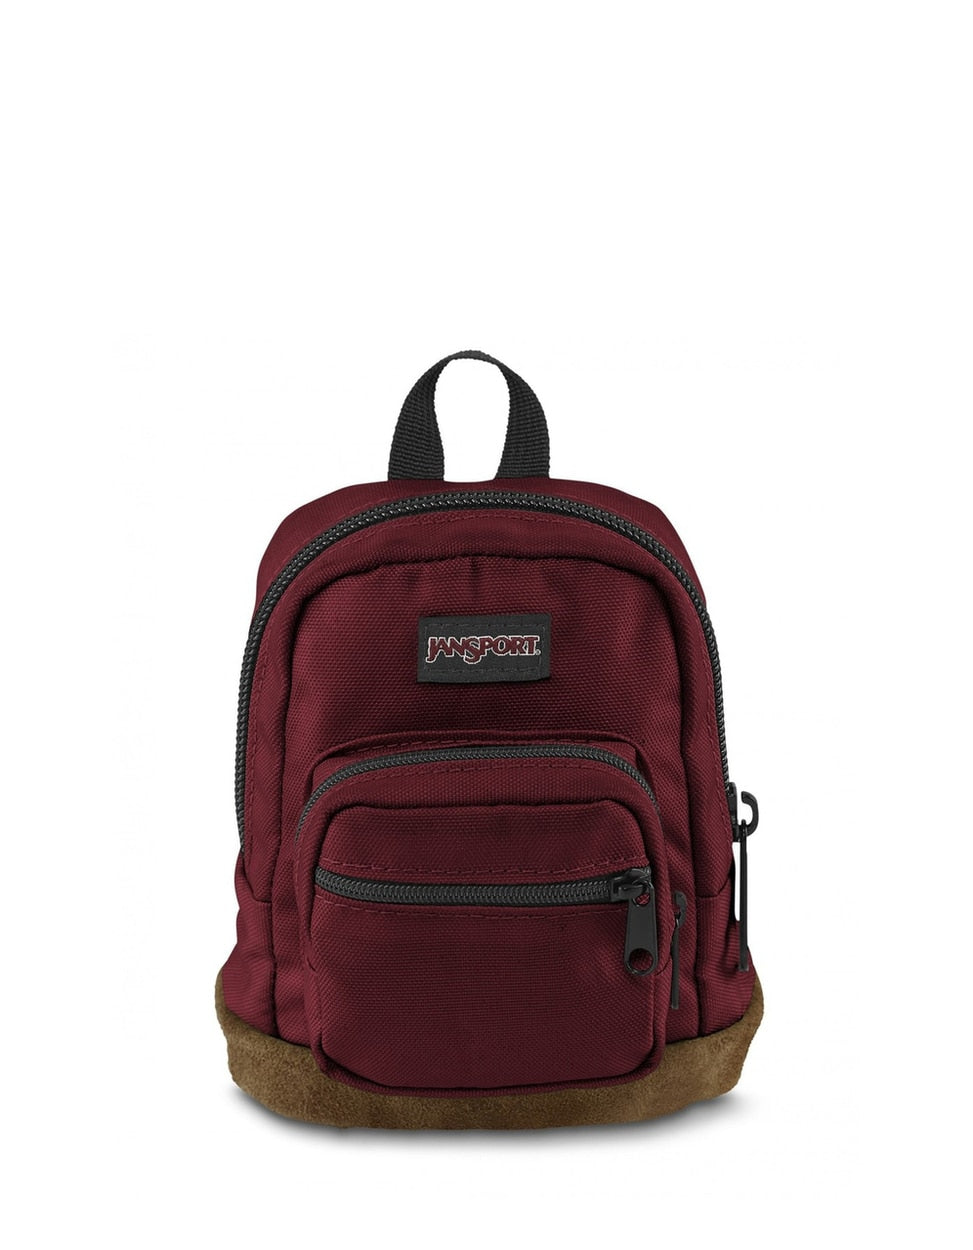 Jansport Right Pouch Miniature Backpack - Viking Red